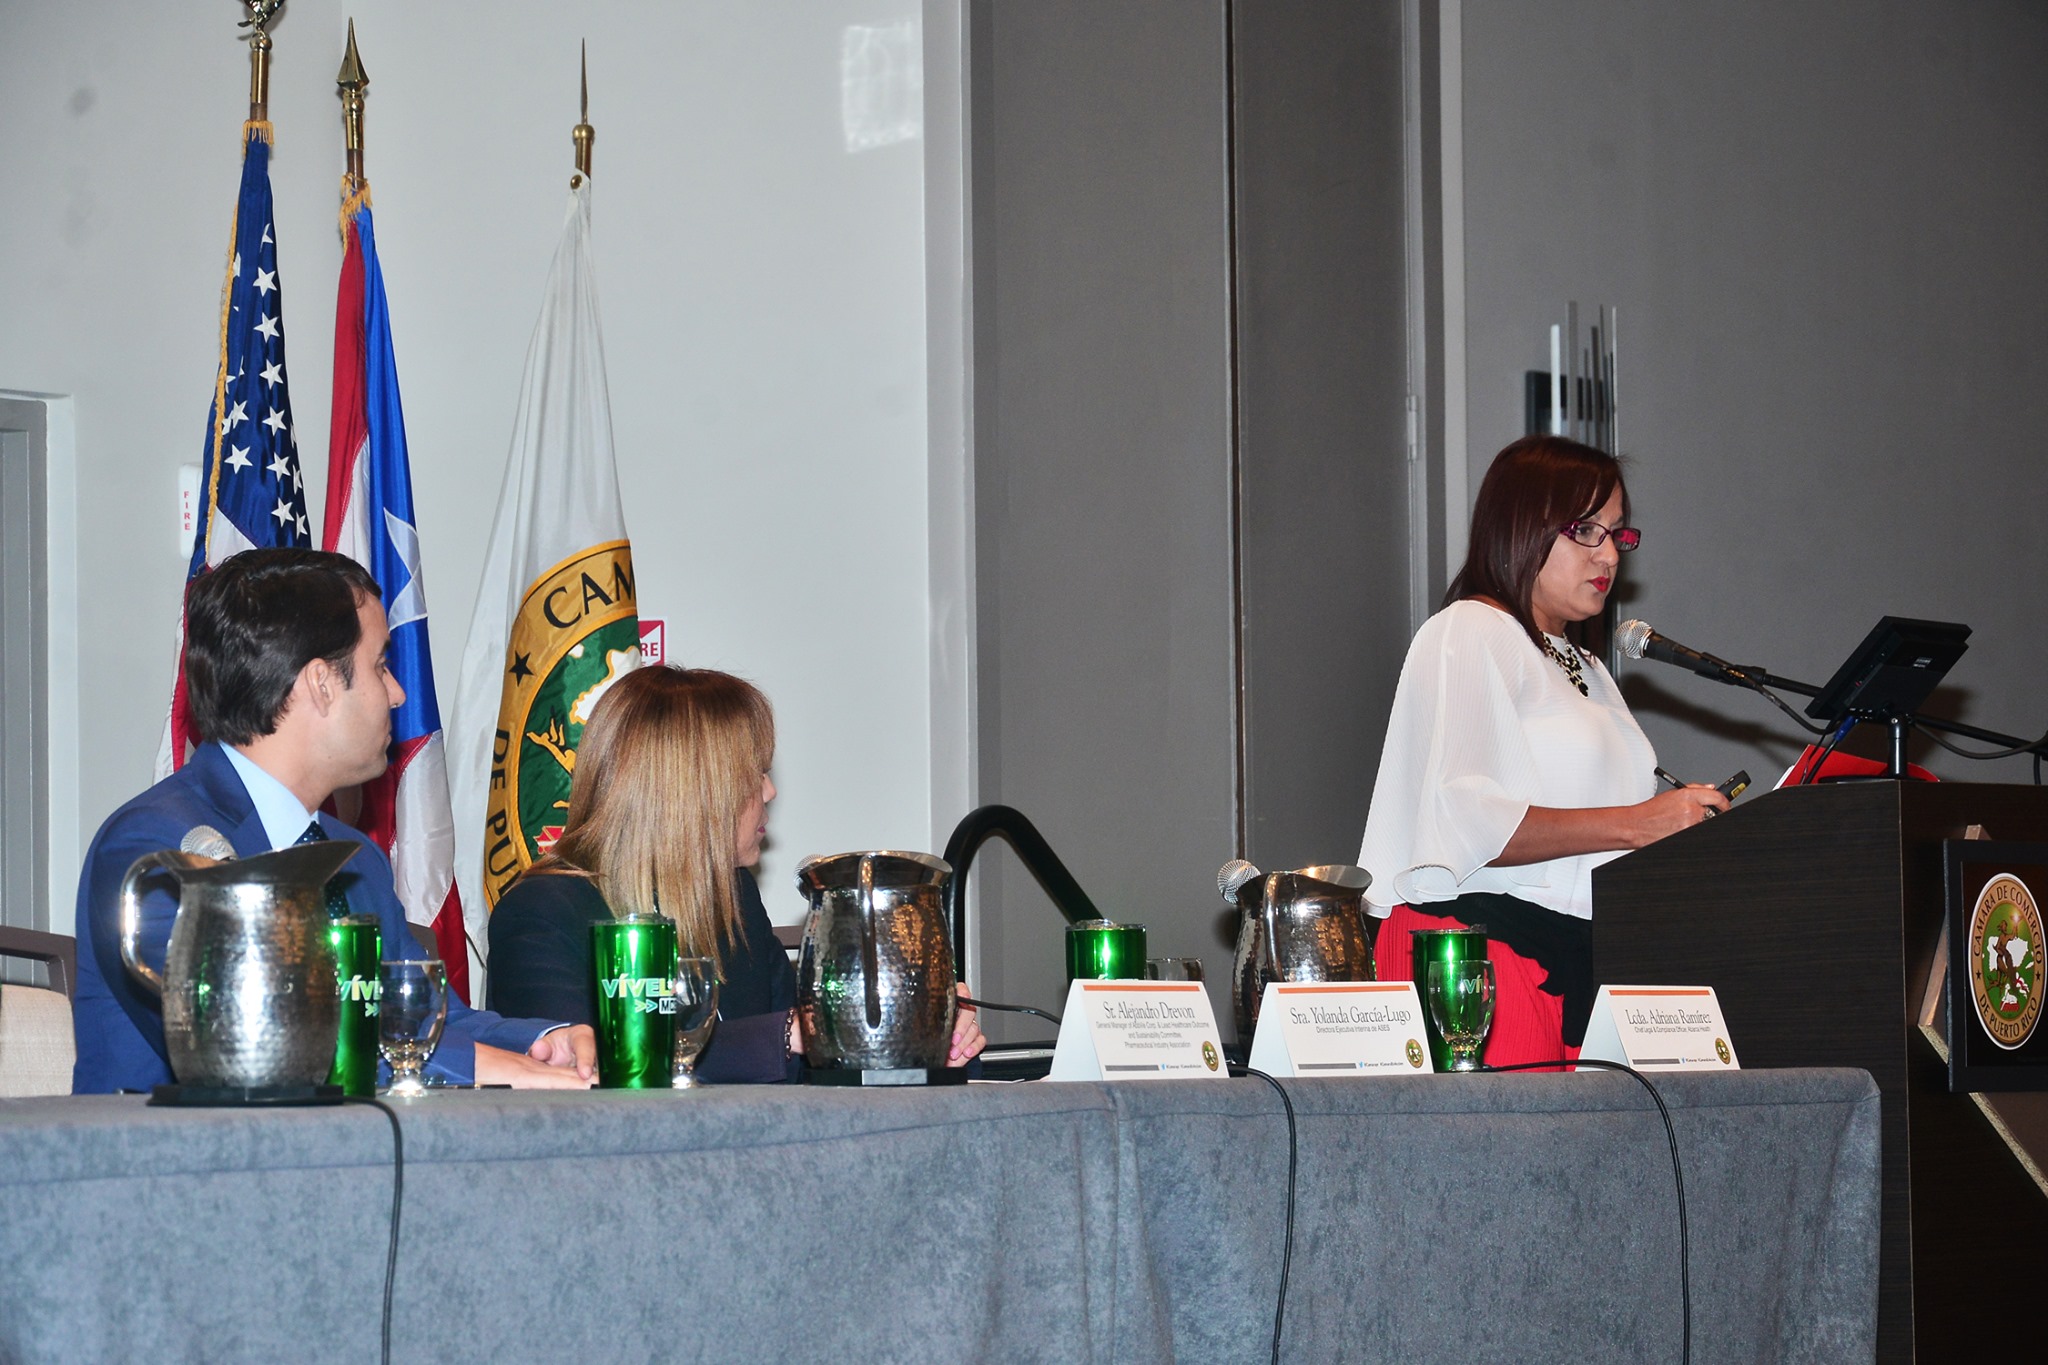 Abarcan Nayda Rivera was selected to lead the panel on “Puerto Rico: Public Health Policy Trends Alerts for the Private Sector” at the 2019 Puerto Rico Health Forum